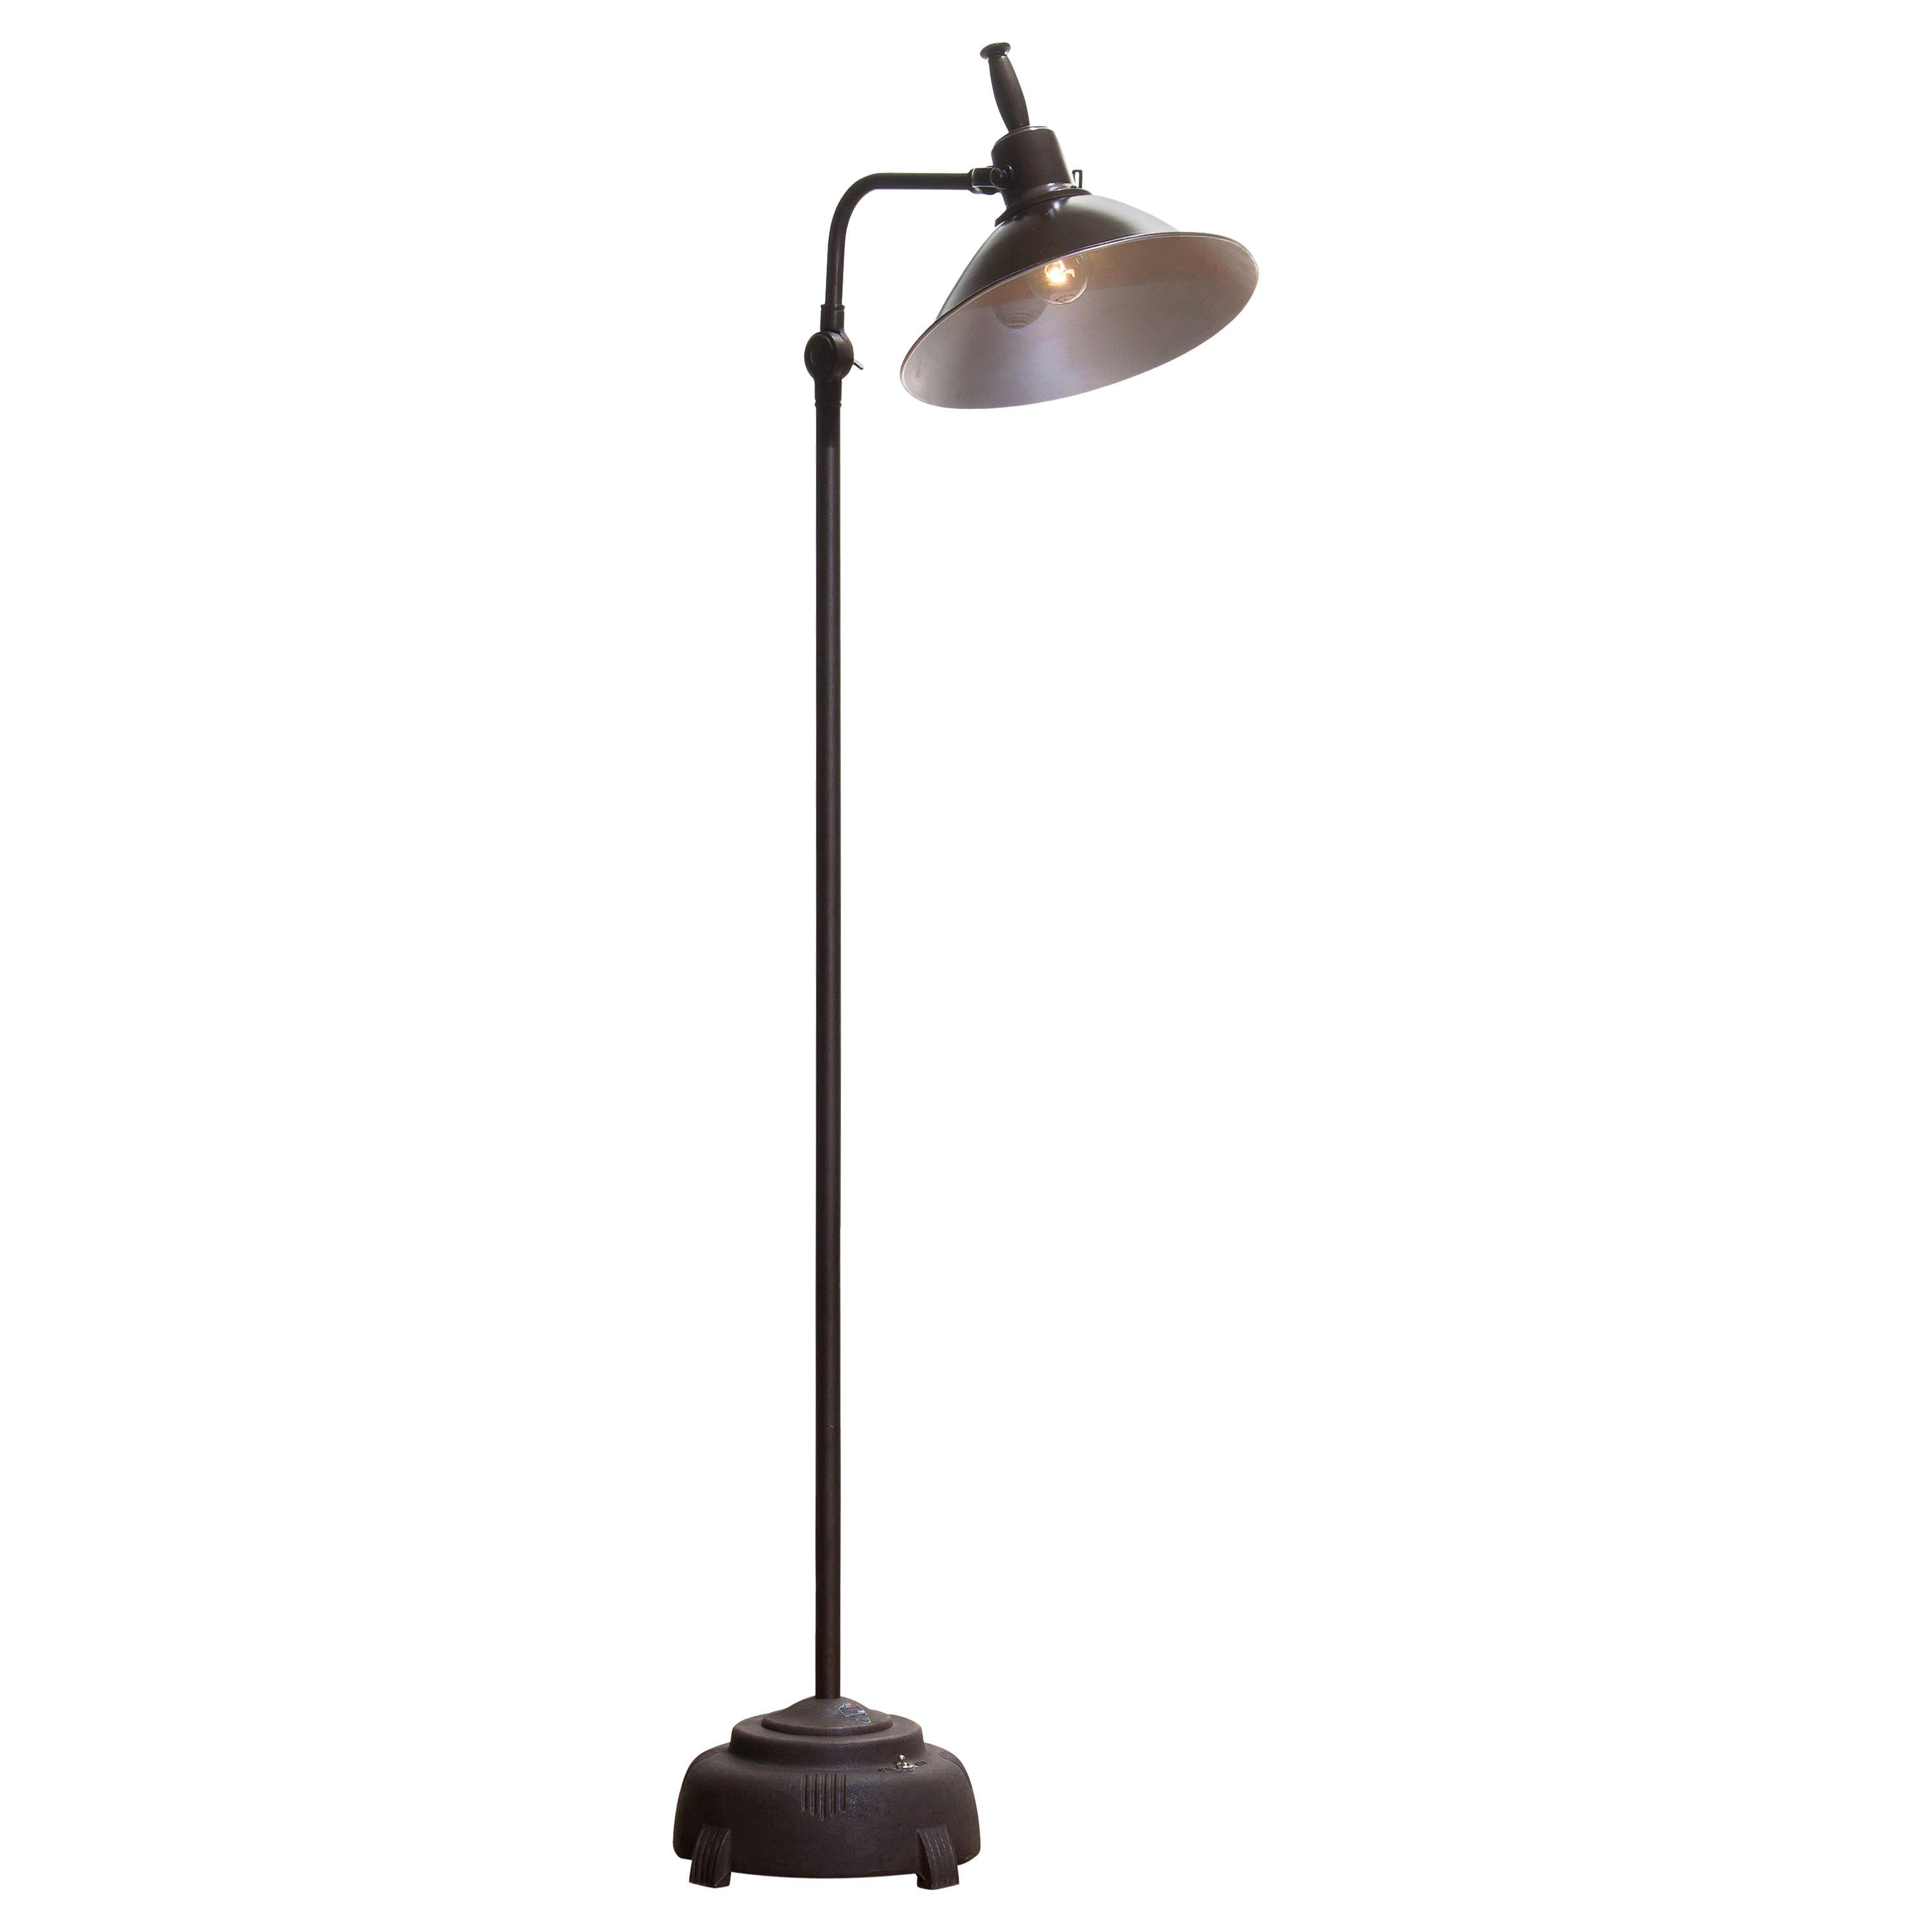 Absolutely amazing an in good condition Industrial floor lamp (formal sunlamp) from Faries Manufacturing MFG & Co made in Illinois USA in brass or cast iron or aluminium!
The lamp is newly wired and therefor suitable for 220 / 110 volts max. 100